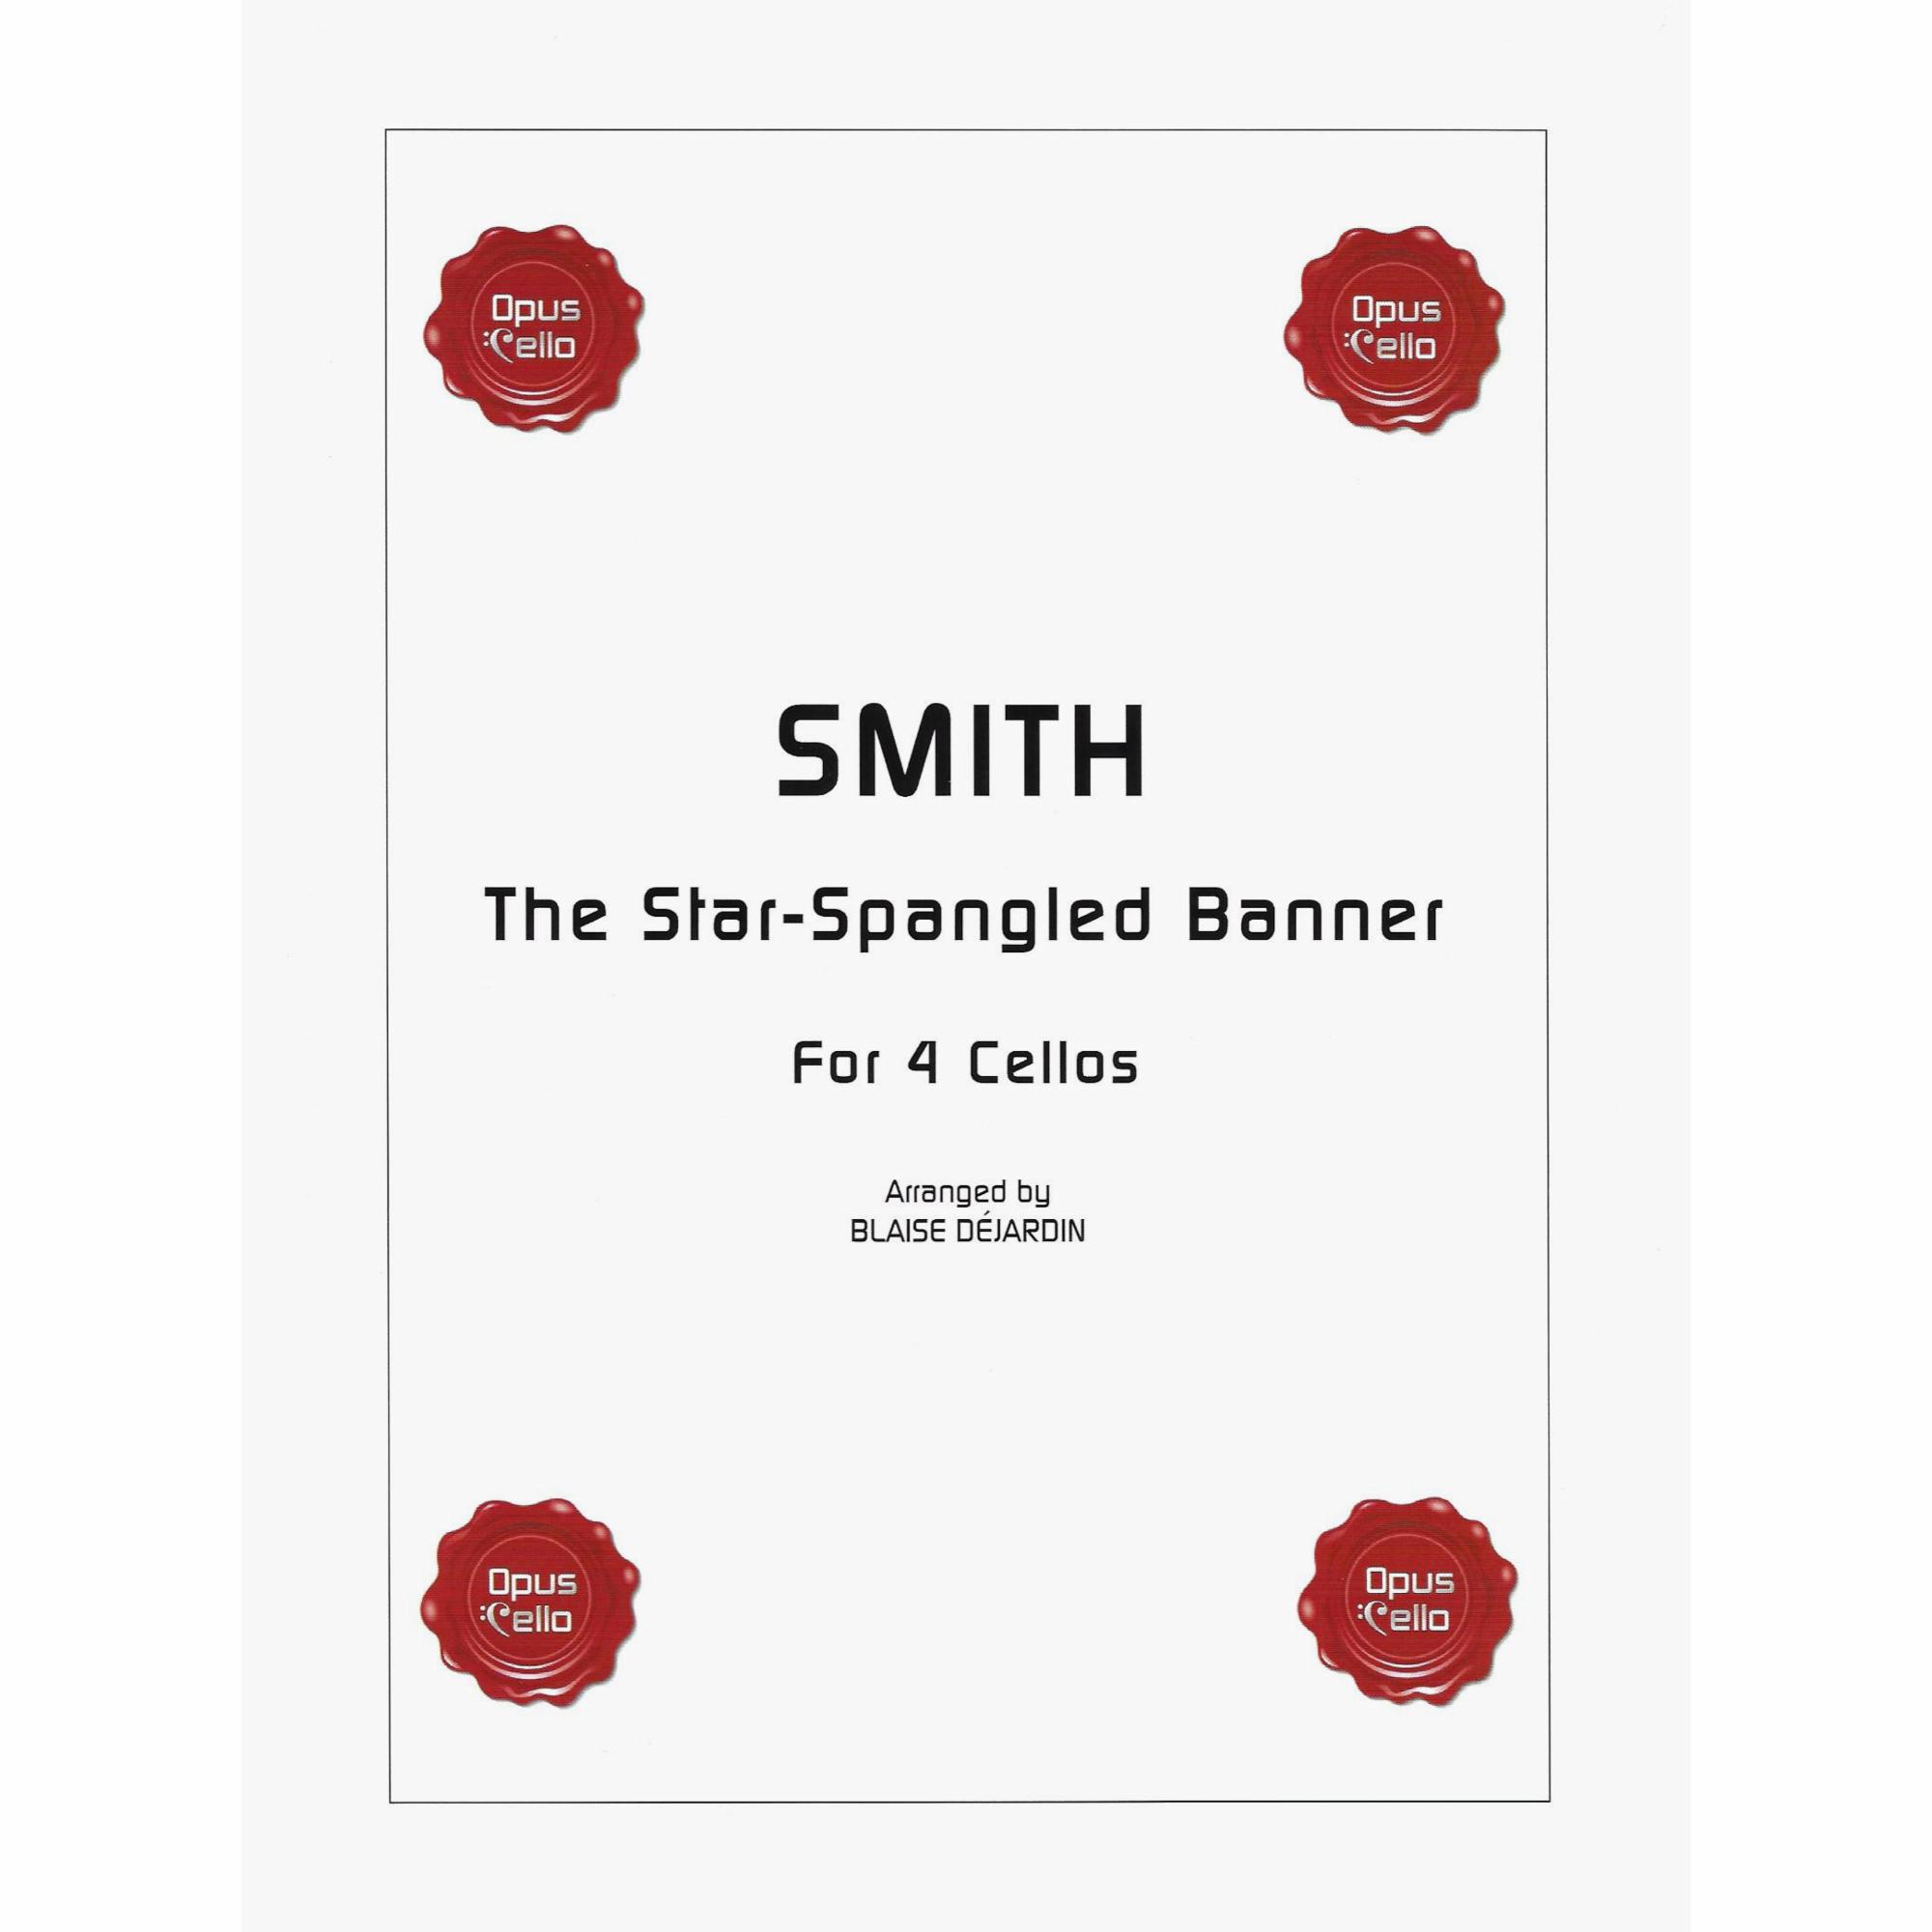 Smith -- The Star-Spangled Banner for Four Cellos